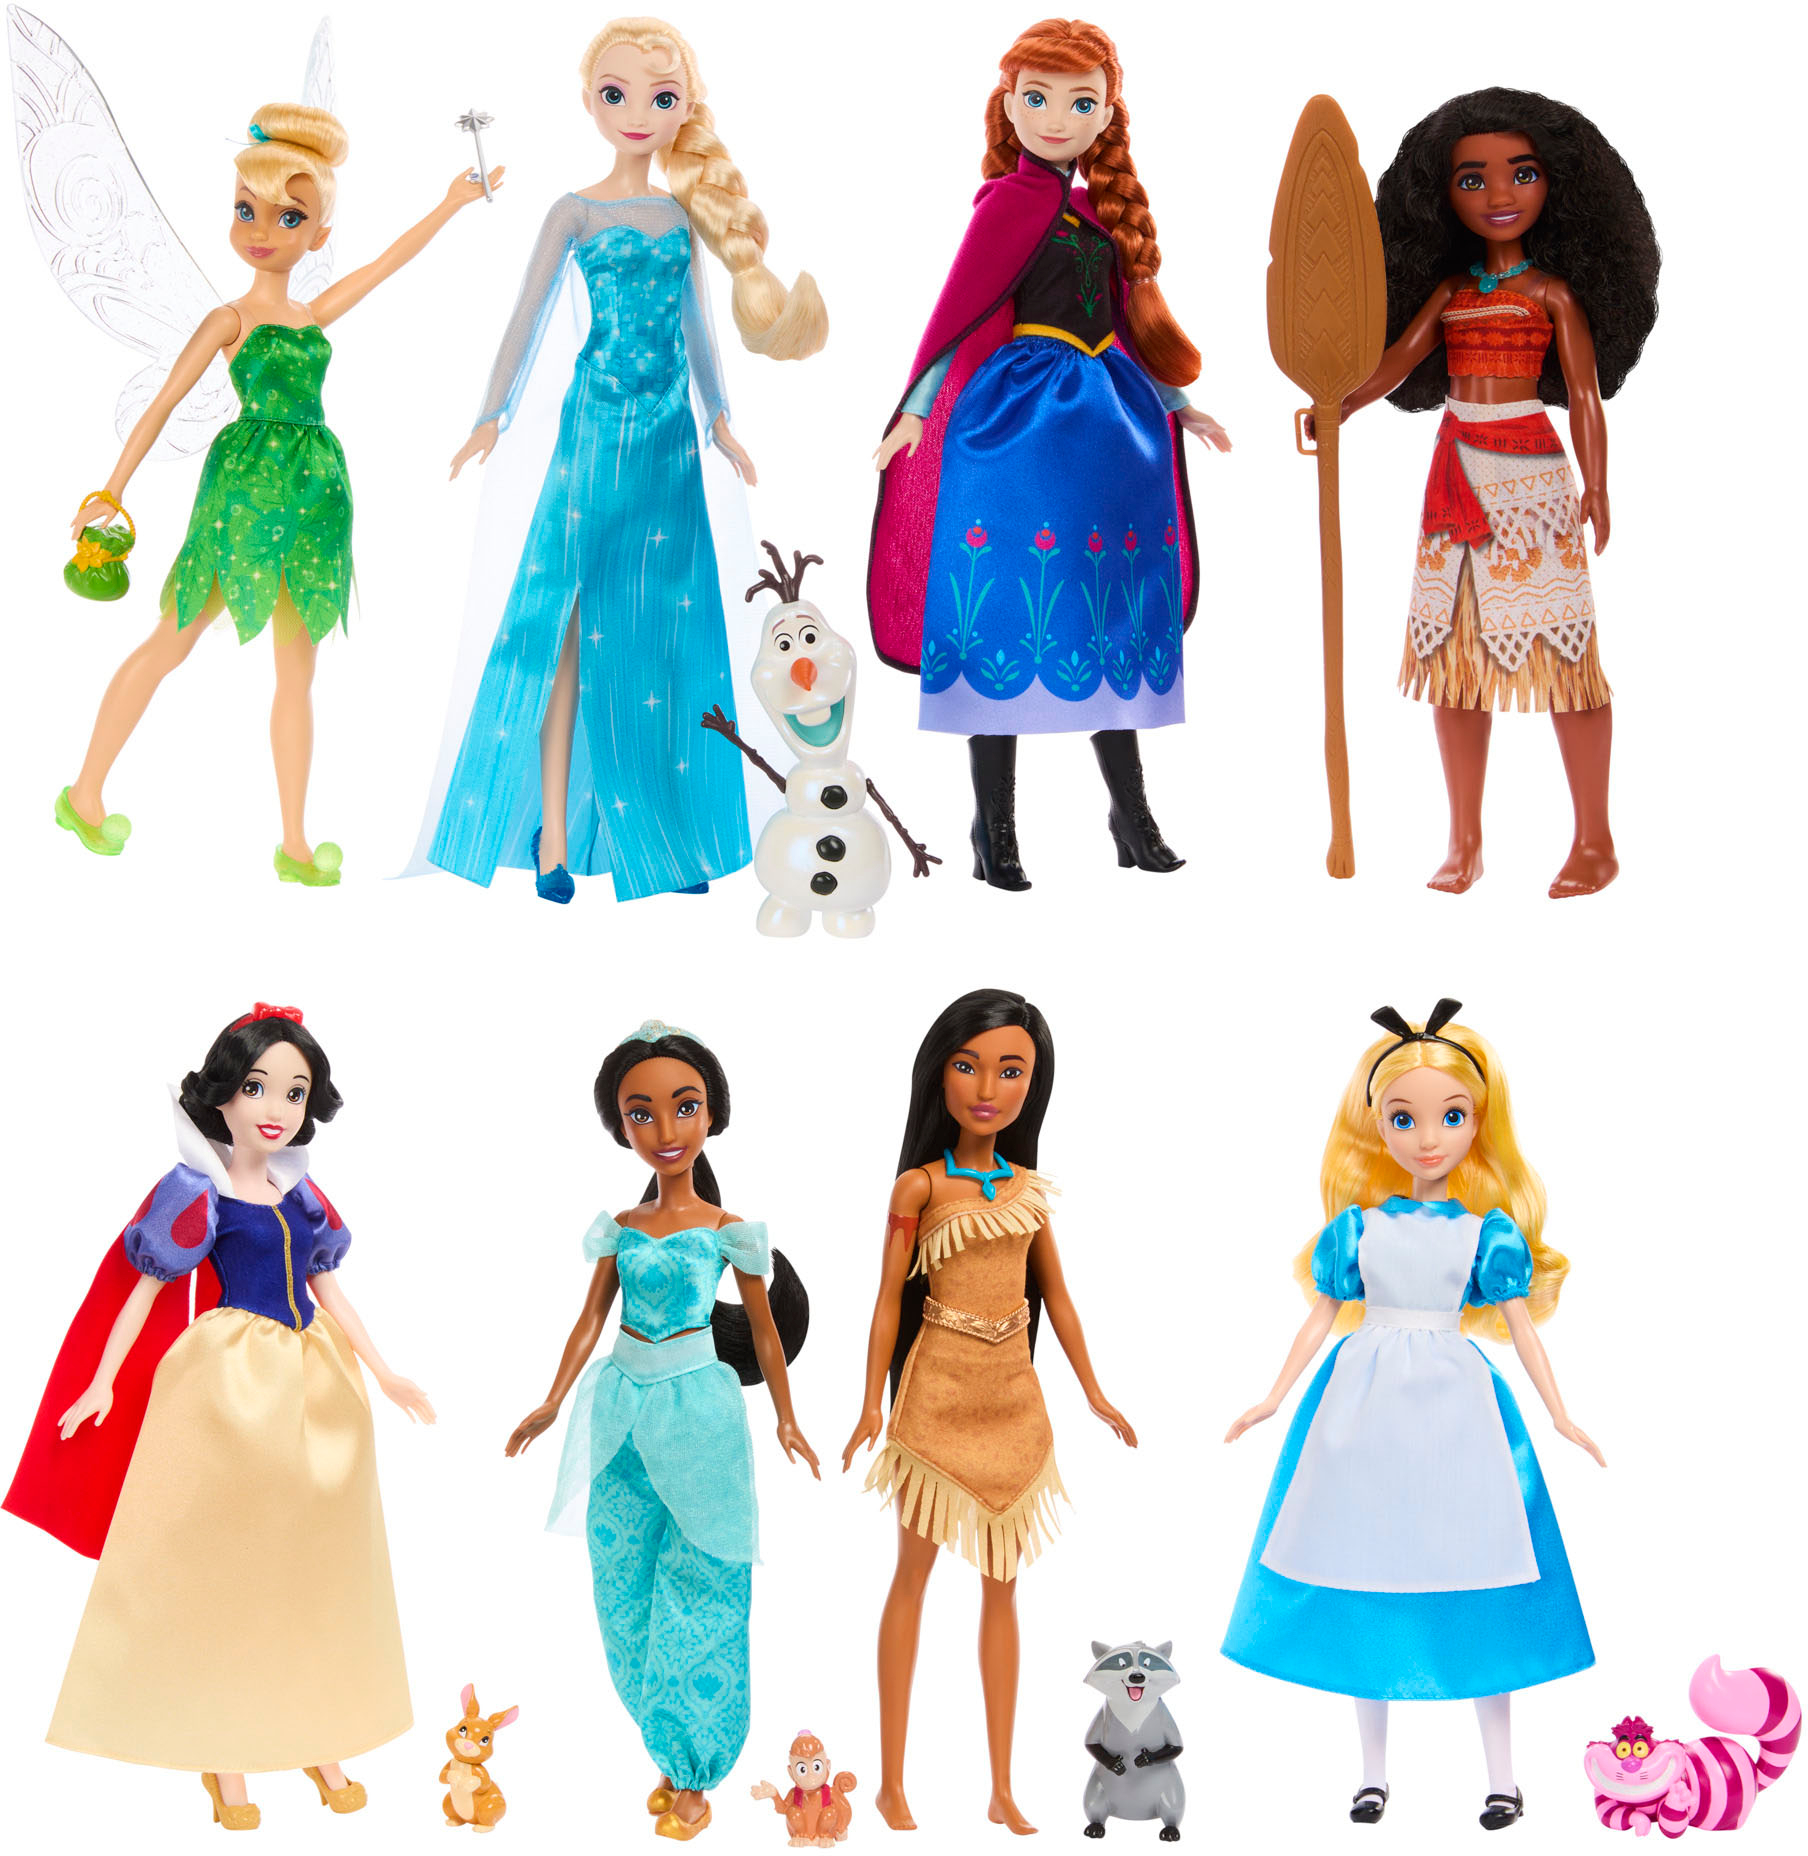 Princess Doll - Dress Up Game on the App Store